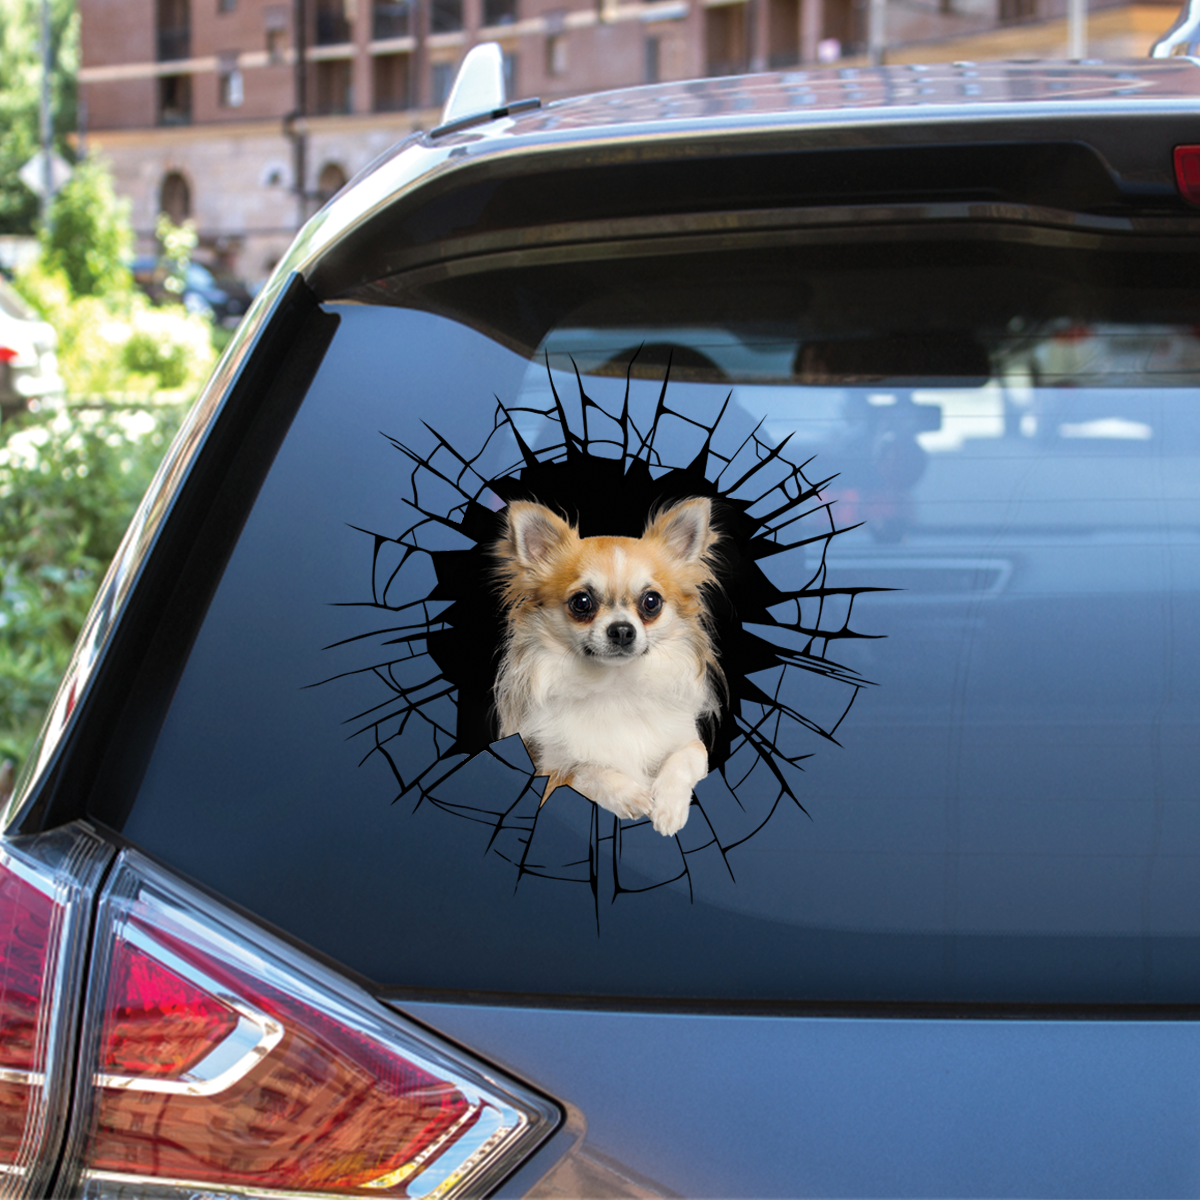 Get In - It's Time For Shopping - Chihuahua Car/ Door/ Fridge/ Laptop Sticker V3